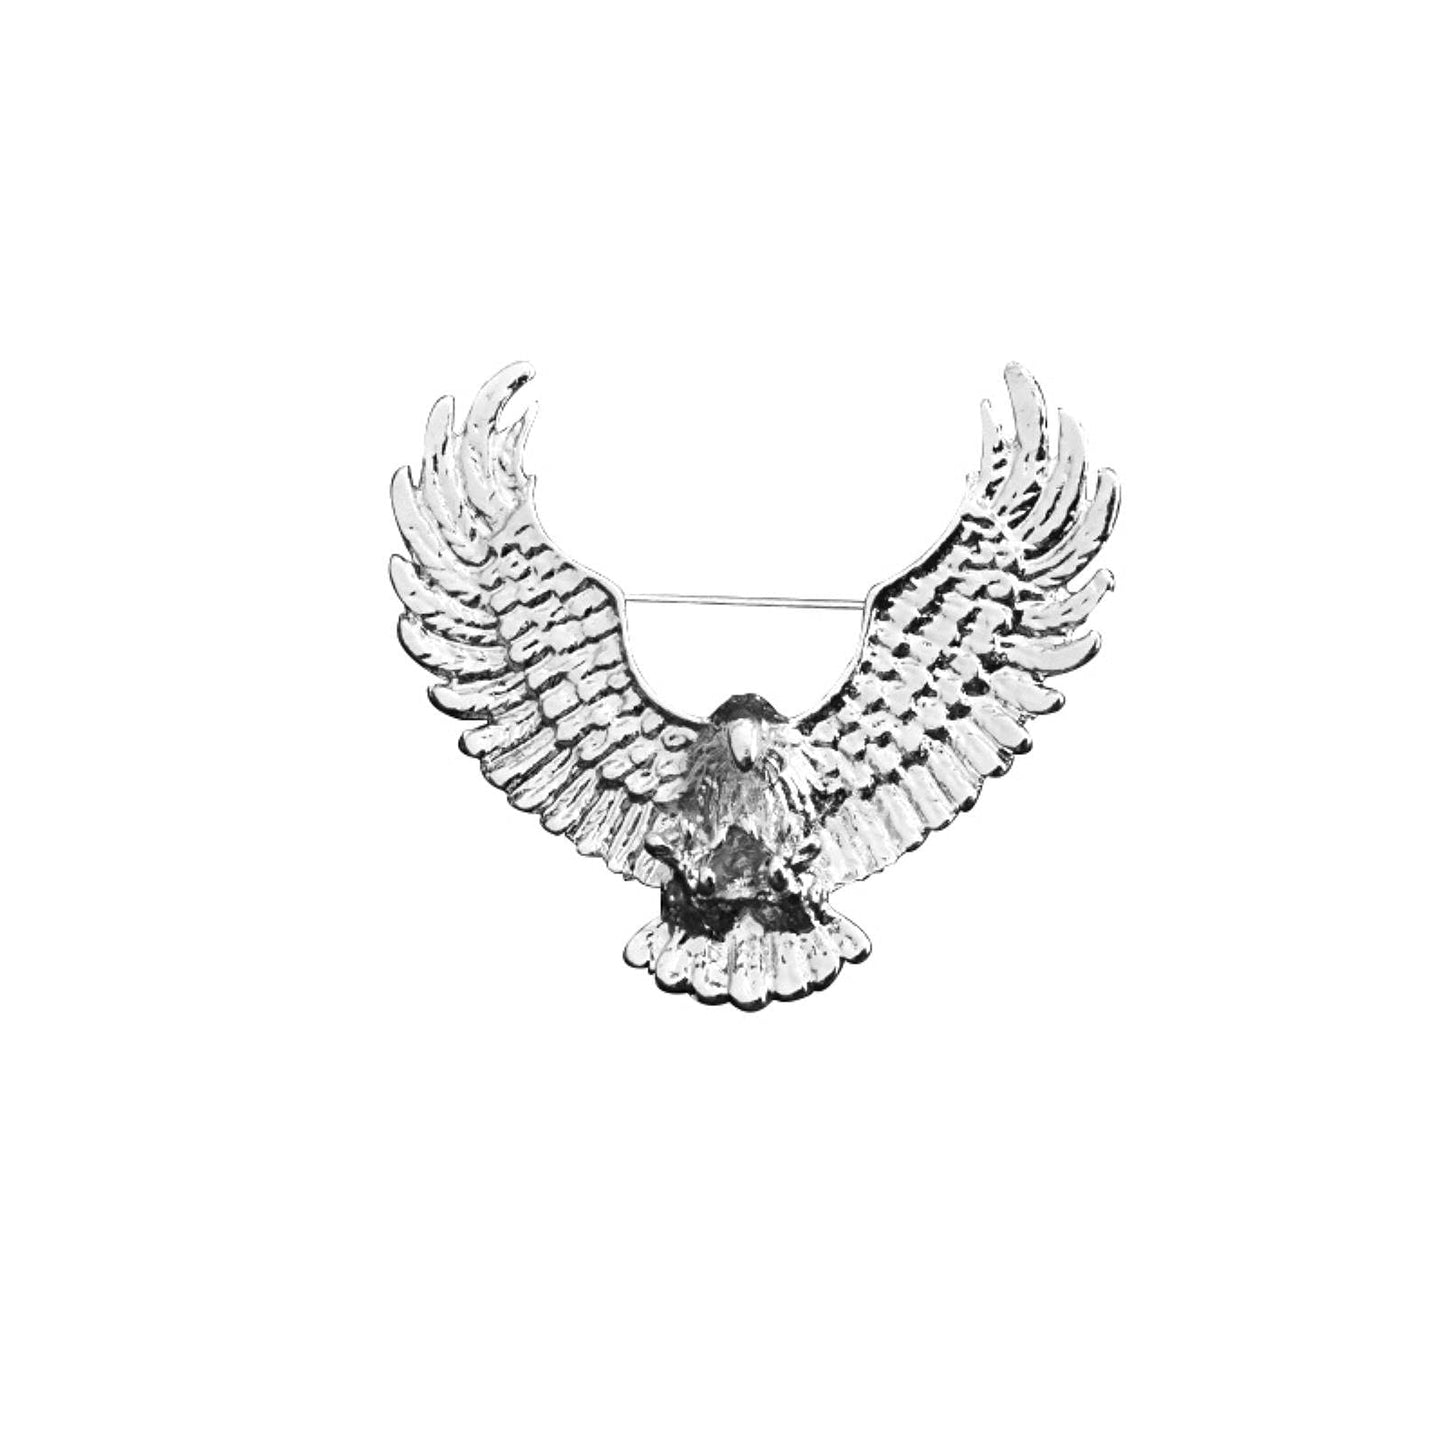 Retro Metal Eagle Brooch Animal Gold Lapel Pin Fashion Suit Shirt Corsage Collar Badge Brooches Jewelry Men Accessories